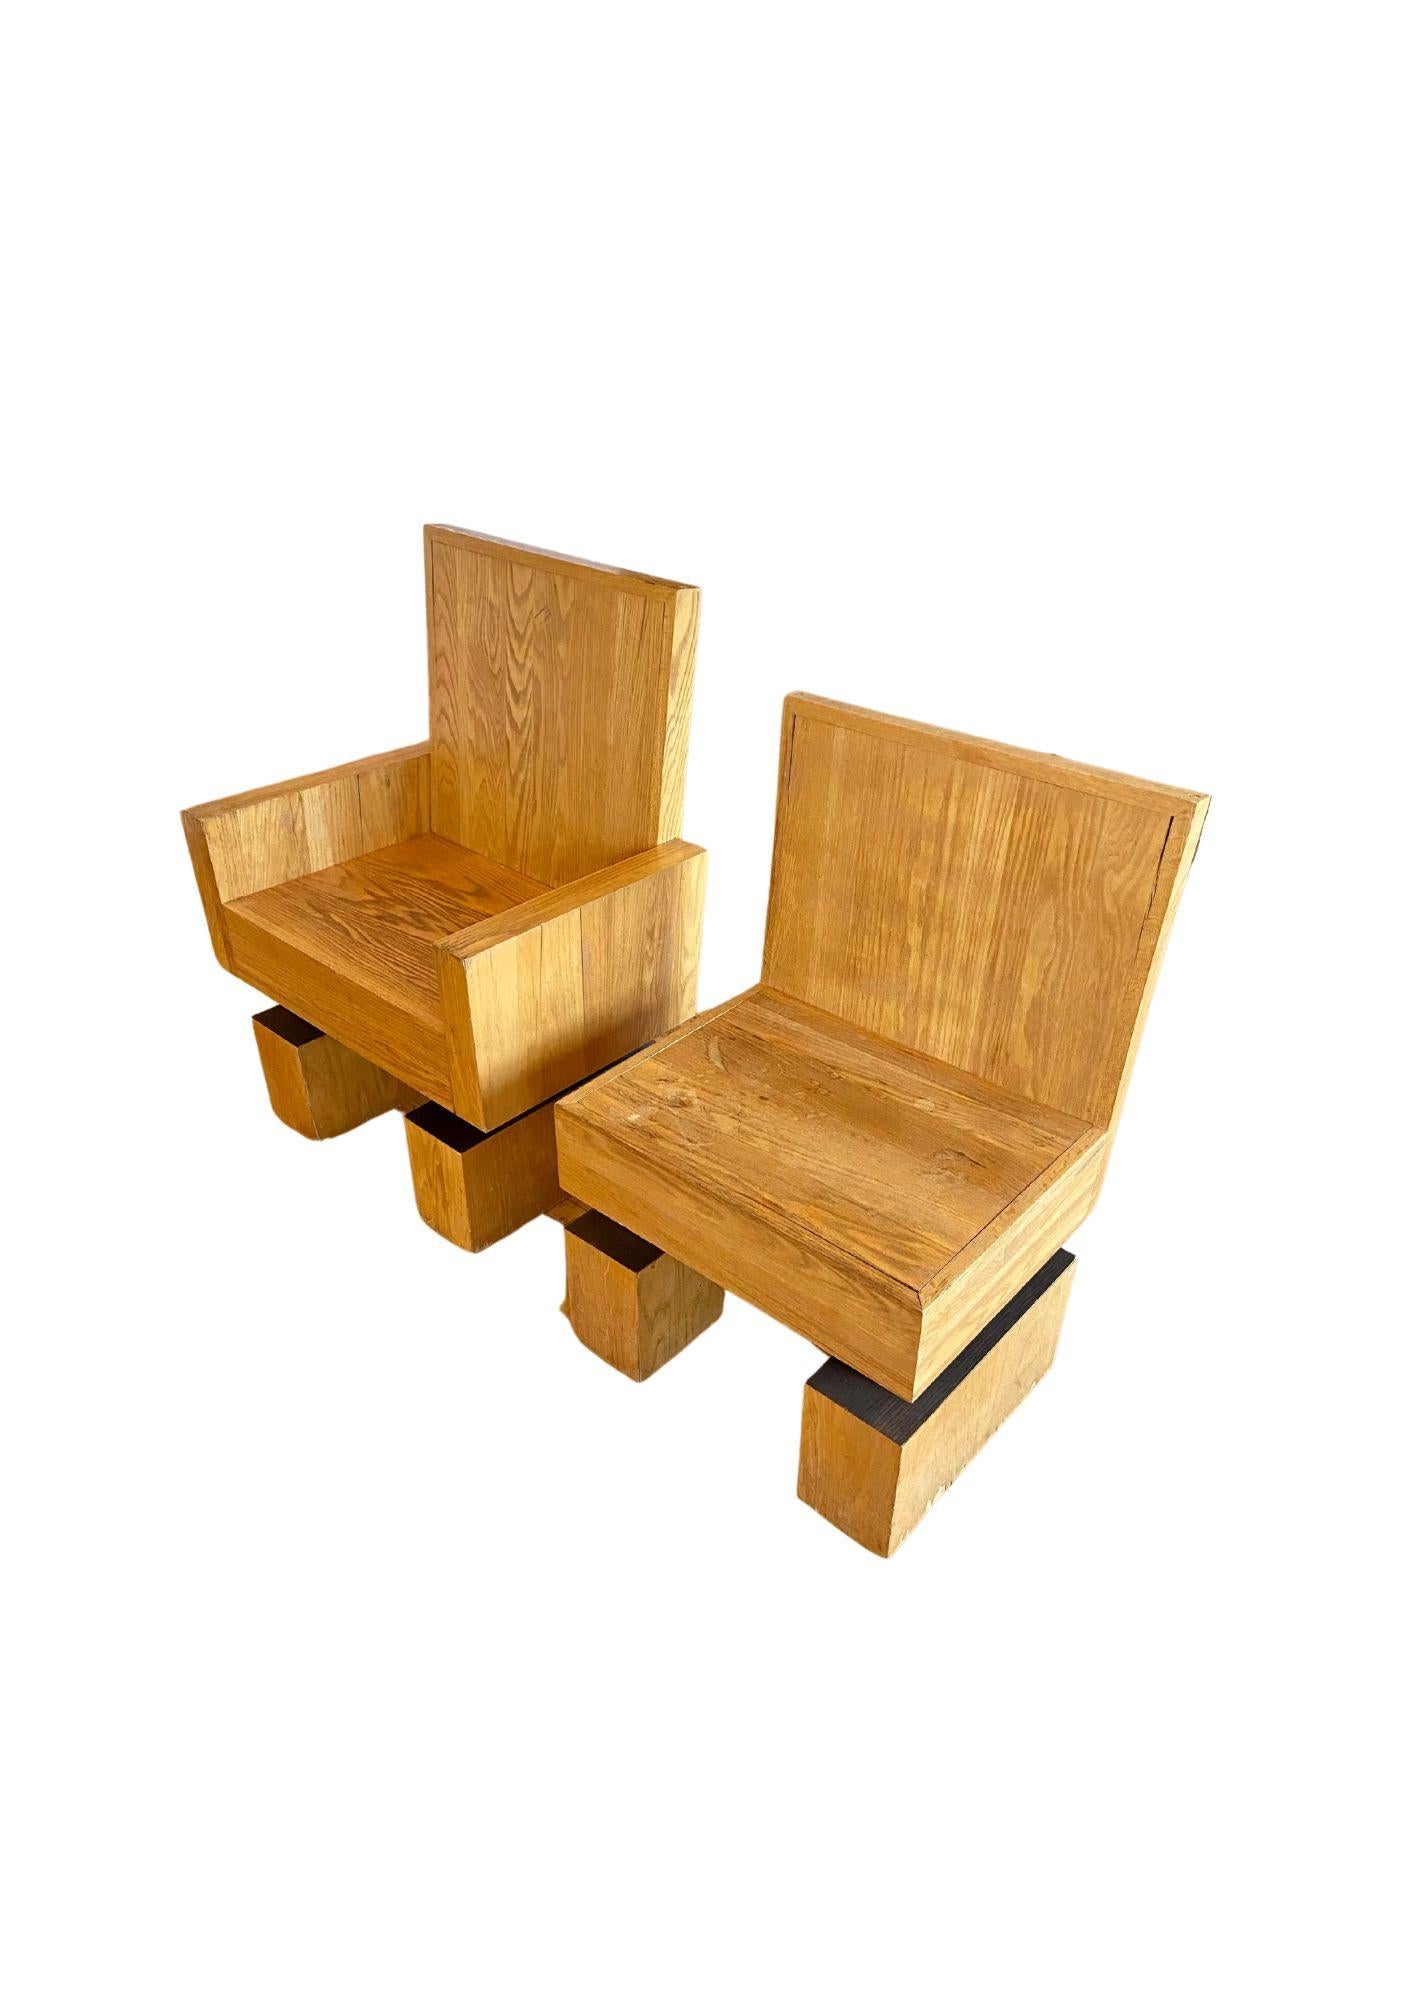 North American Vintage Studio Crafted Oak Side Chairs, Circa 1970 For Sale